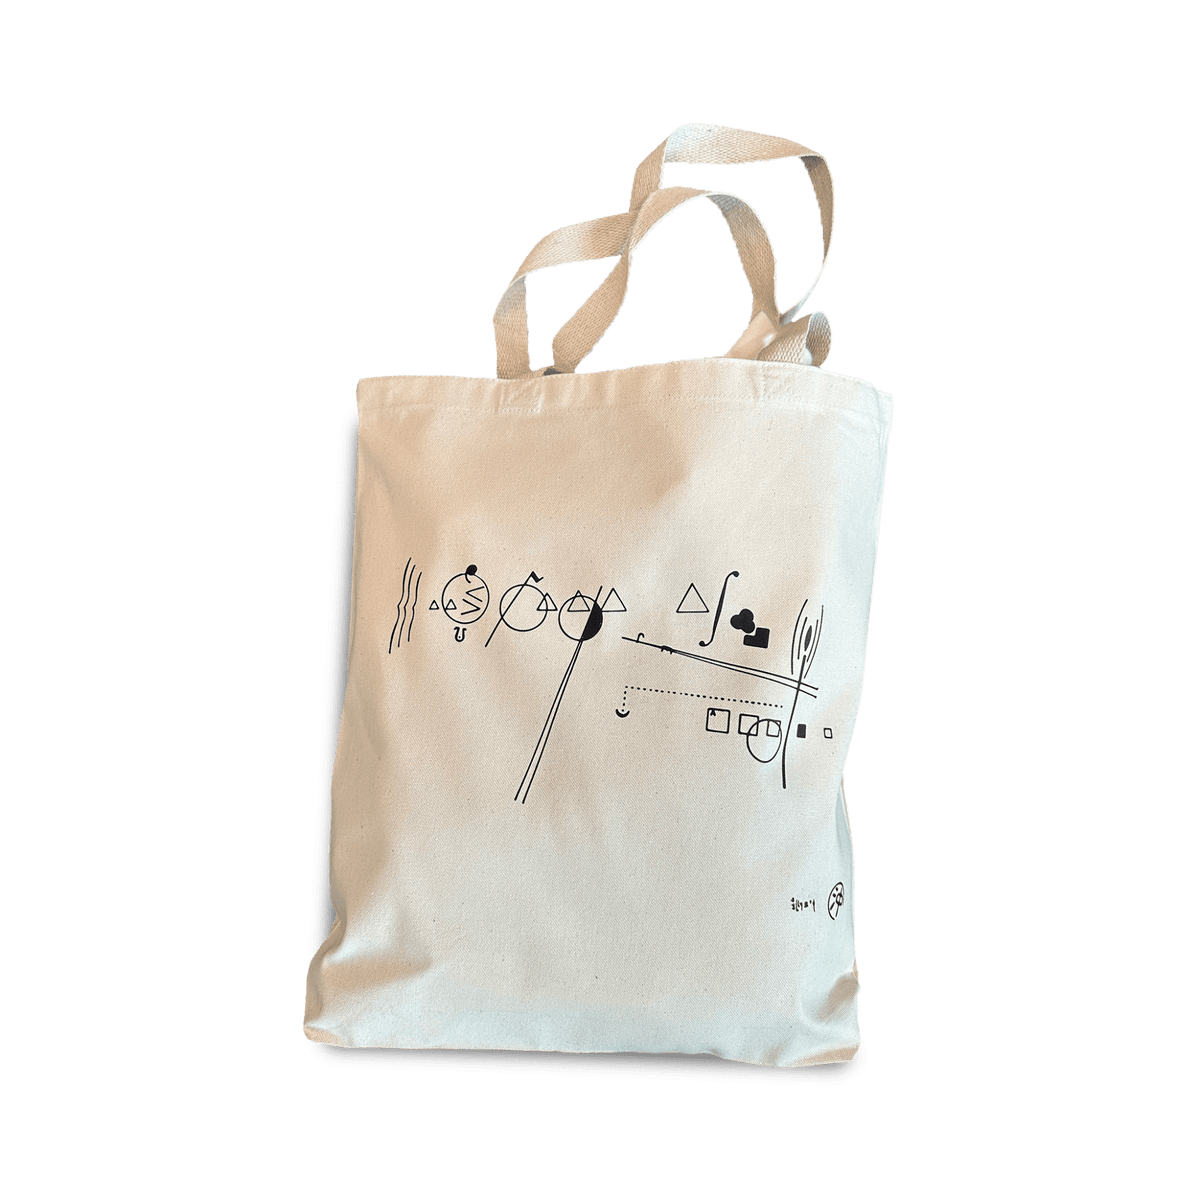 Billy Martin &quot;Water illies&quot; Tote Bag - Graphic Score - grown&amp;sewn